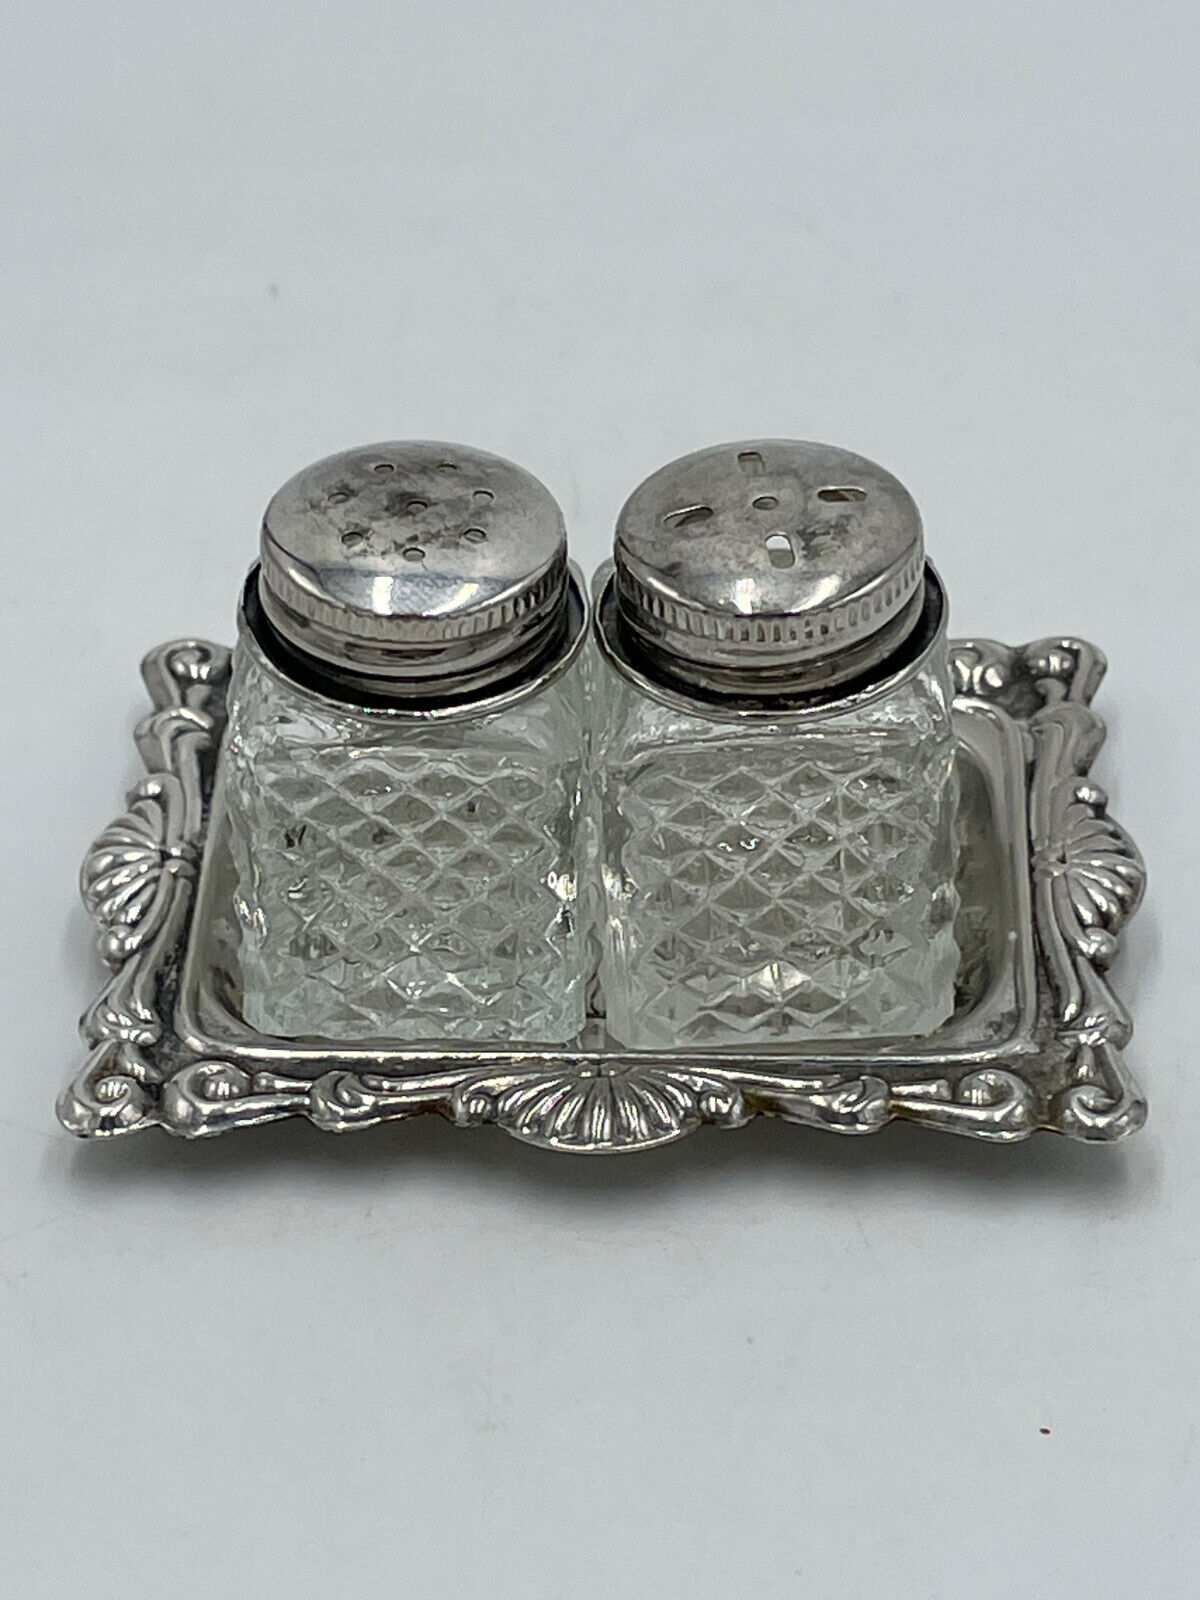 Vintage Individual Salt and Pepper Shakers Silver Plate Tray and Tops Hong Kong